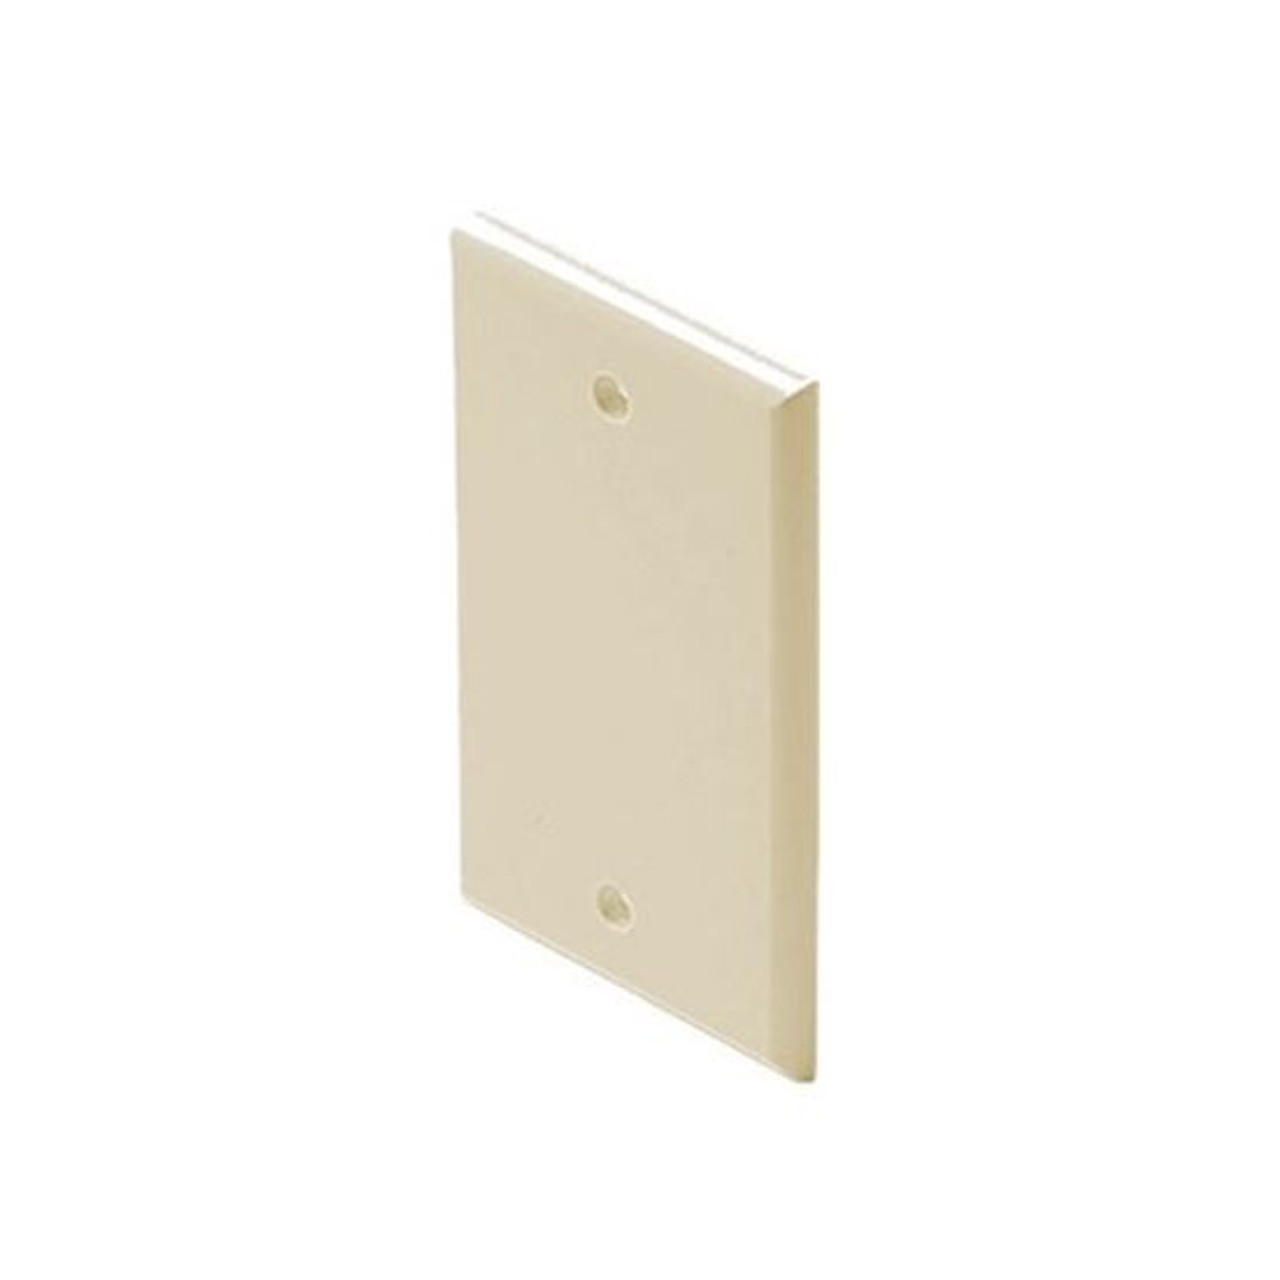 Eagle Blank Wall Plate Ivory Single Gang Blank Wall Plate Flush Mount 1 Pack Single Gang Wall Cover Plate Installation Ivory Electrical Box Cover, High Impact ABS Construction